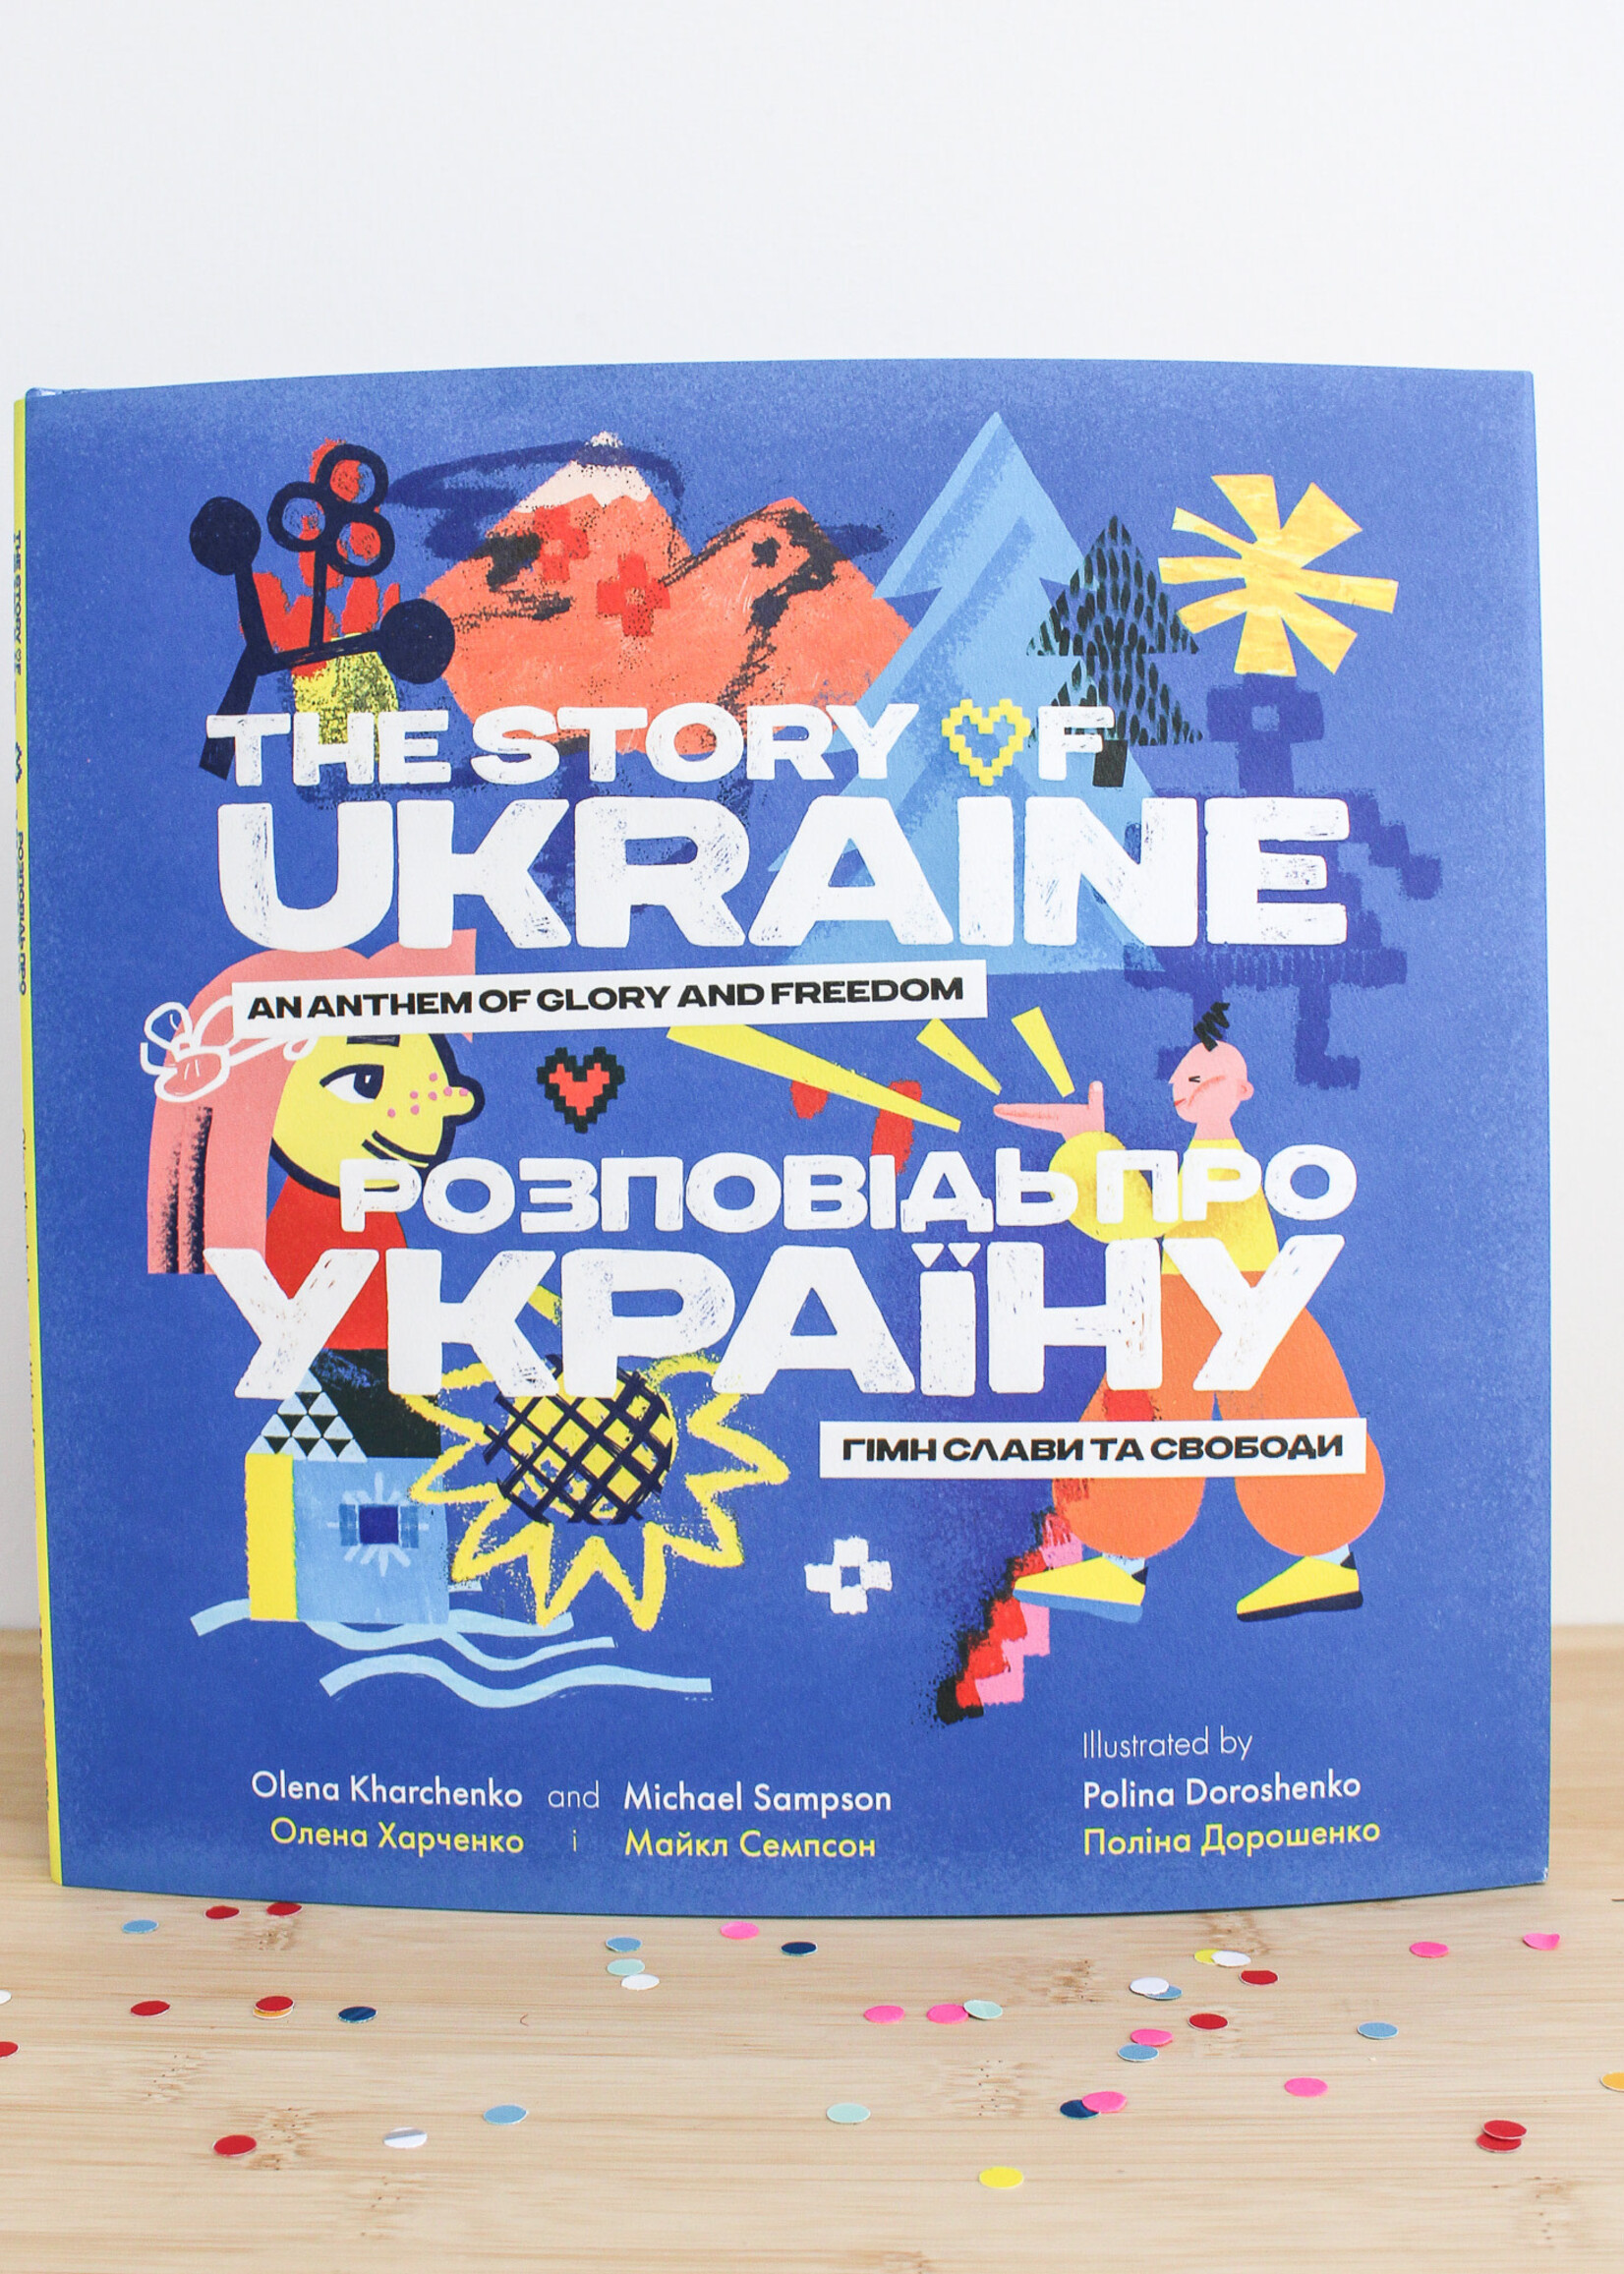 BOOK - Kid' s- The Story of Ukraine by Michael Sampson ( An Anthem of the Glory and Freedom)